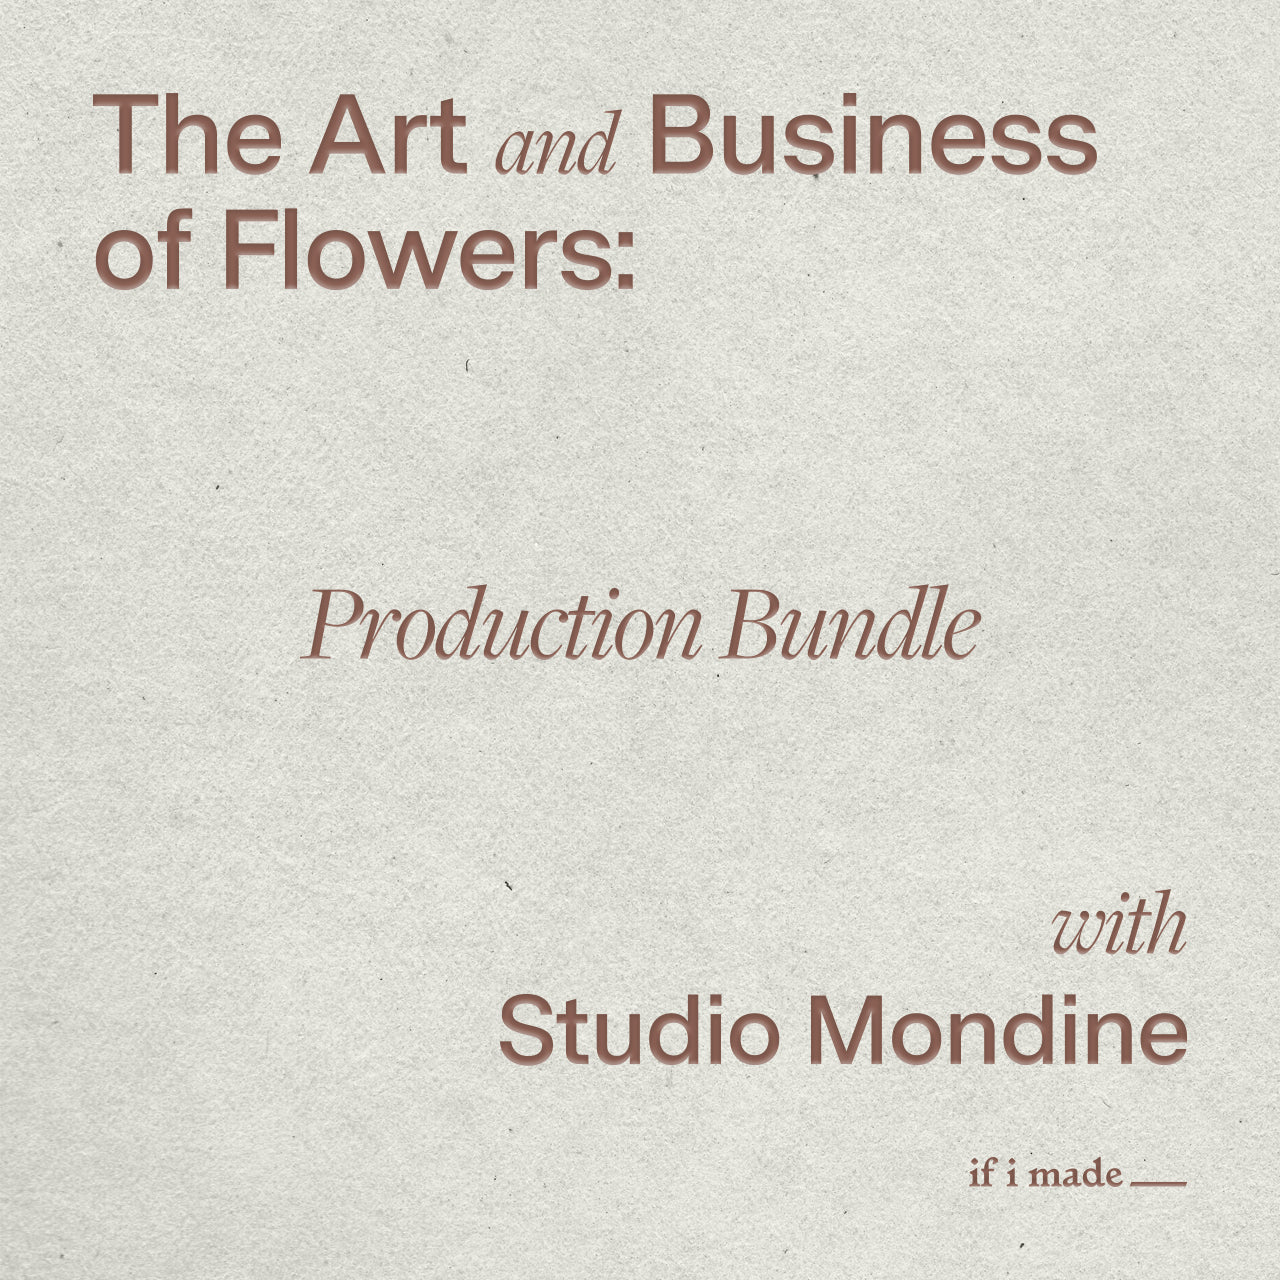 The Art and Business of Flowers with Studio Mondine: Production Bundle (SOP0222)